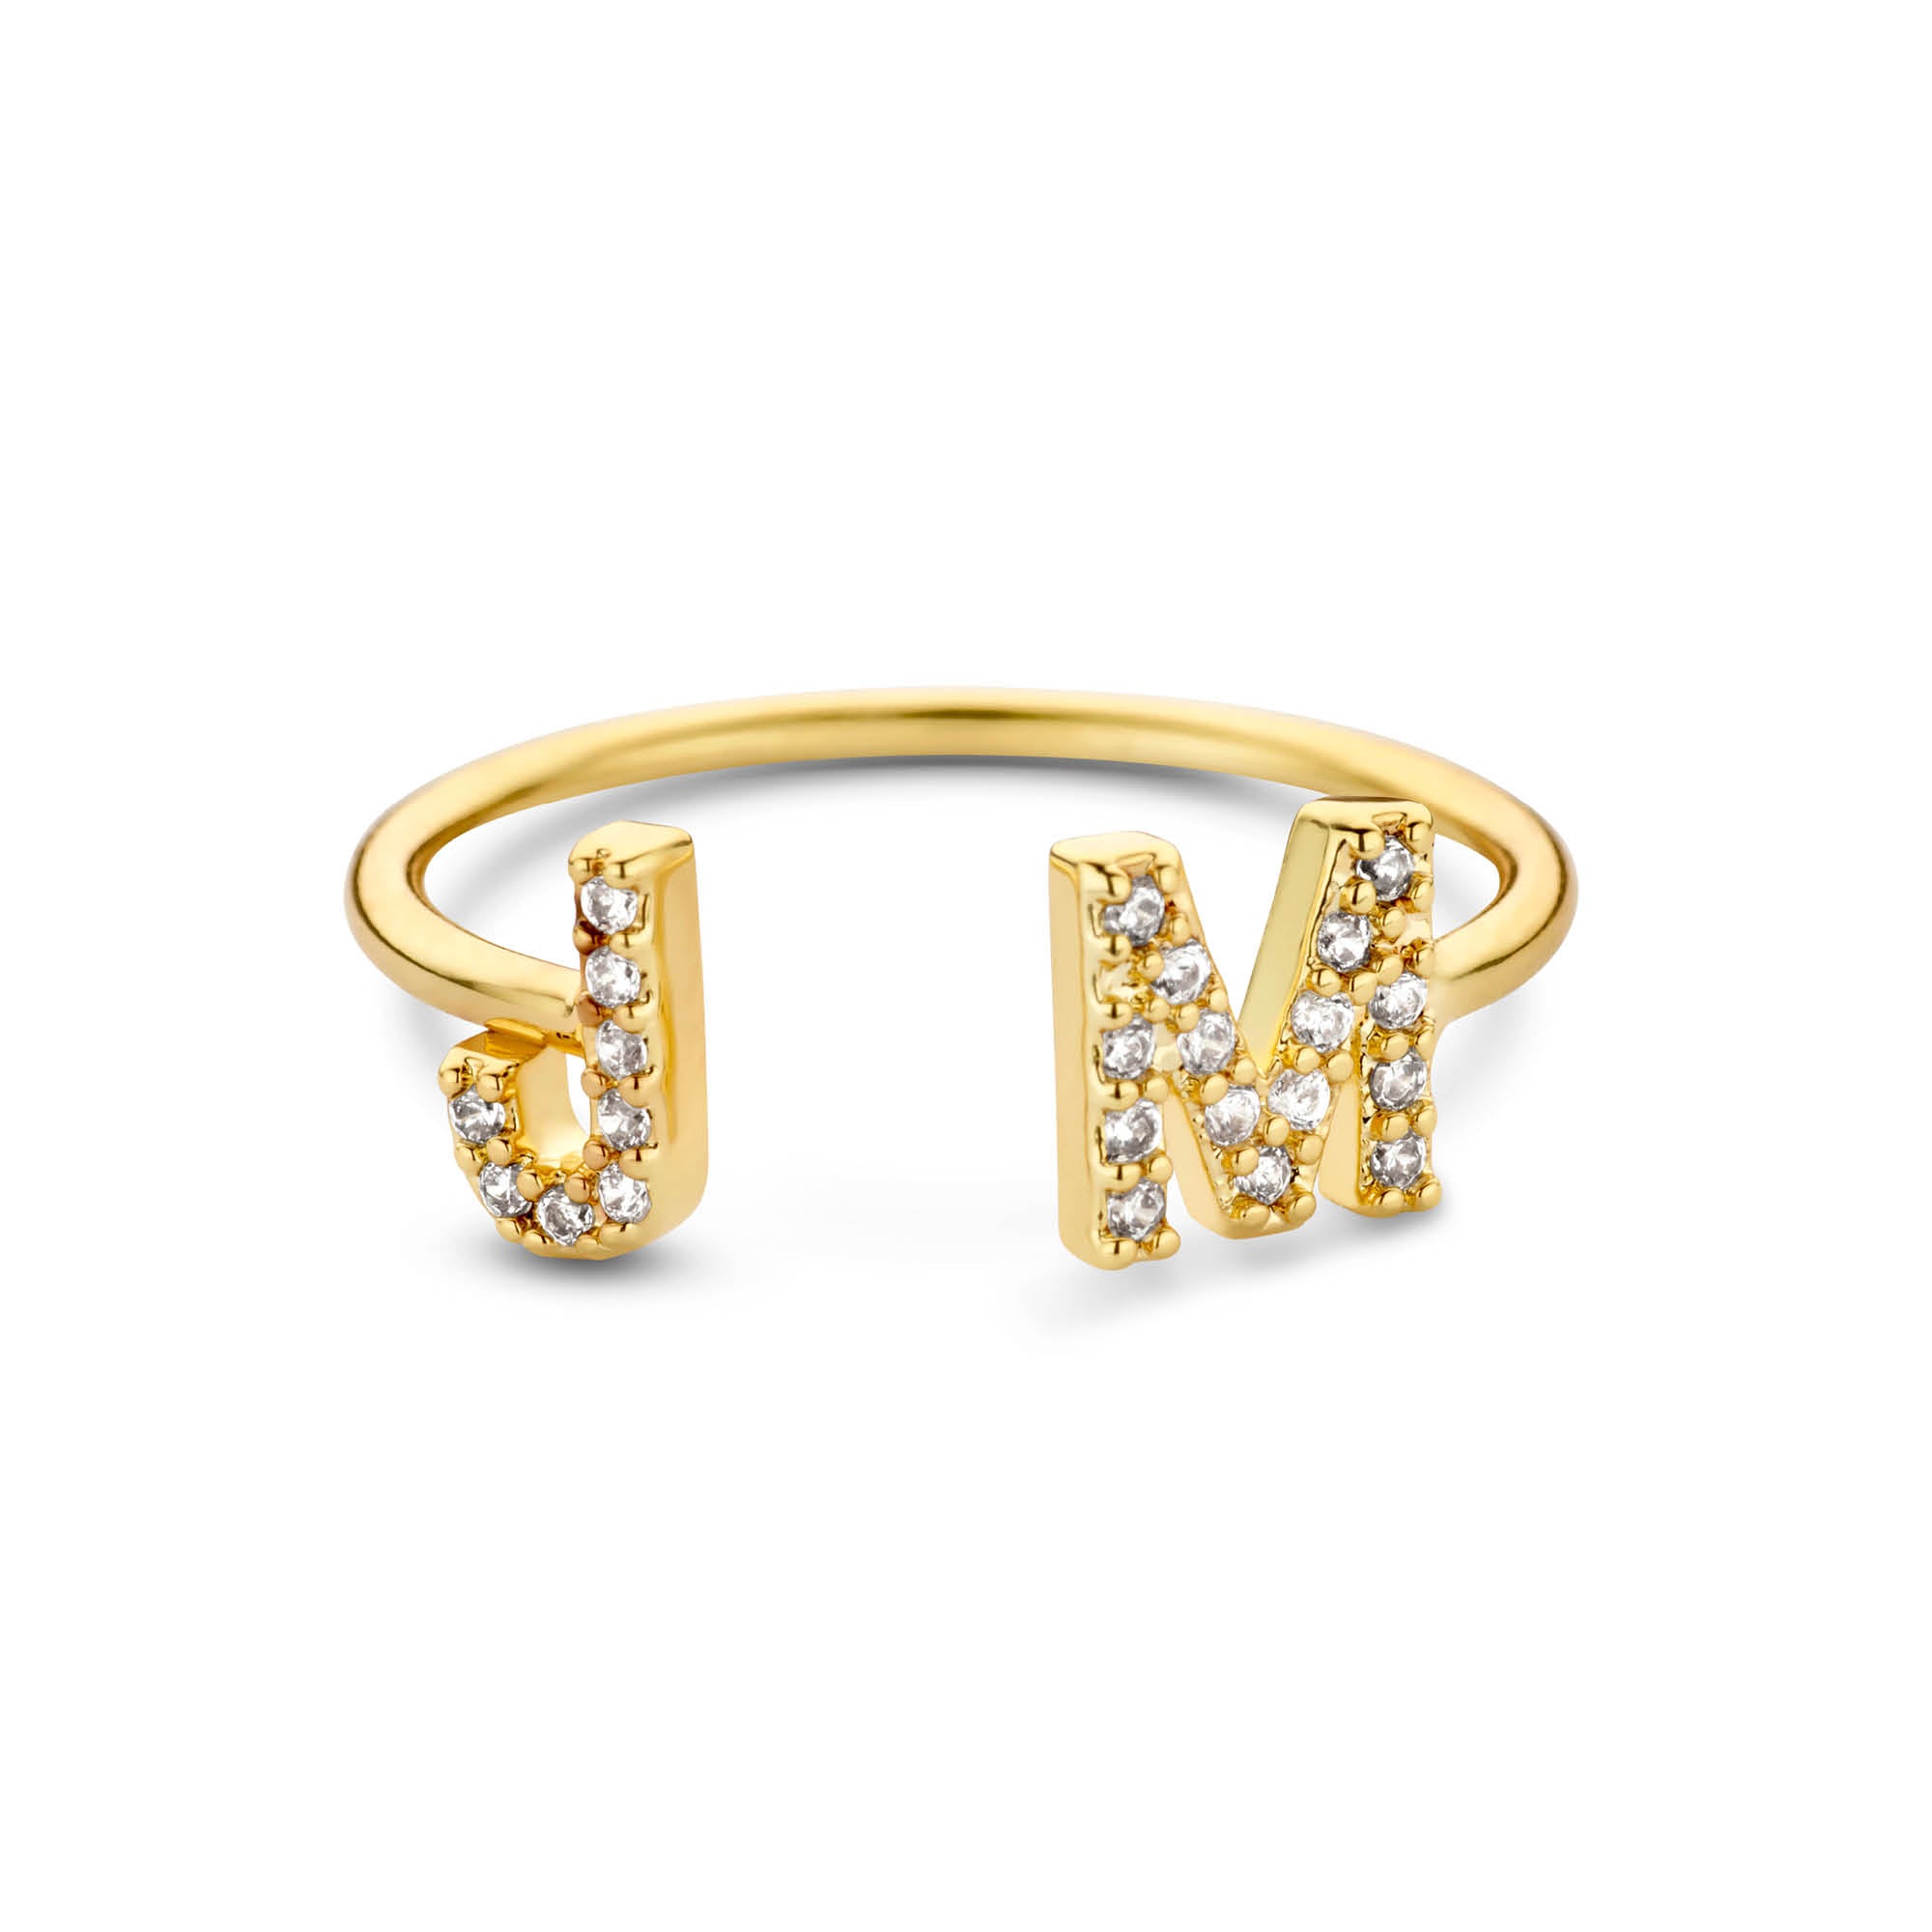 Custommade 2 Initial Ring [2 initials]